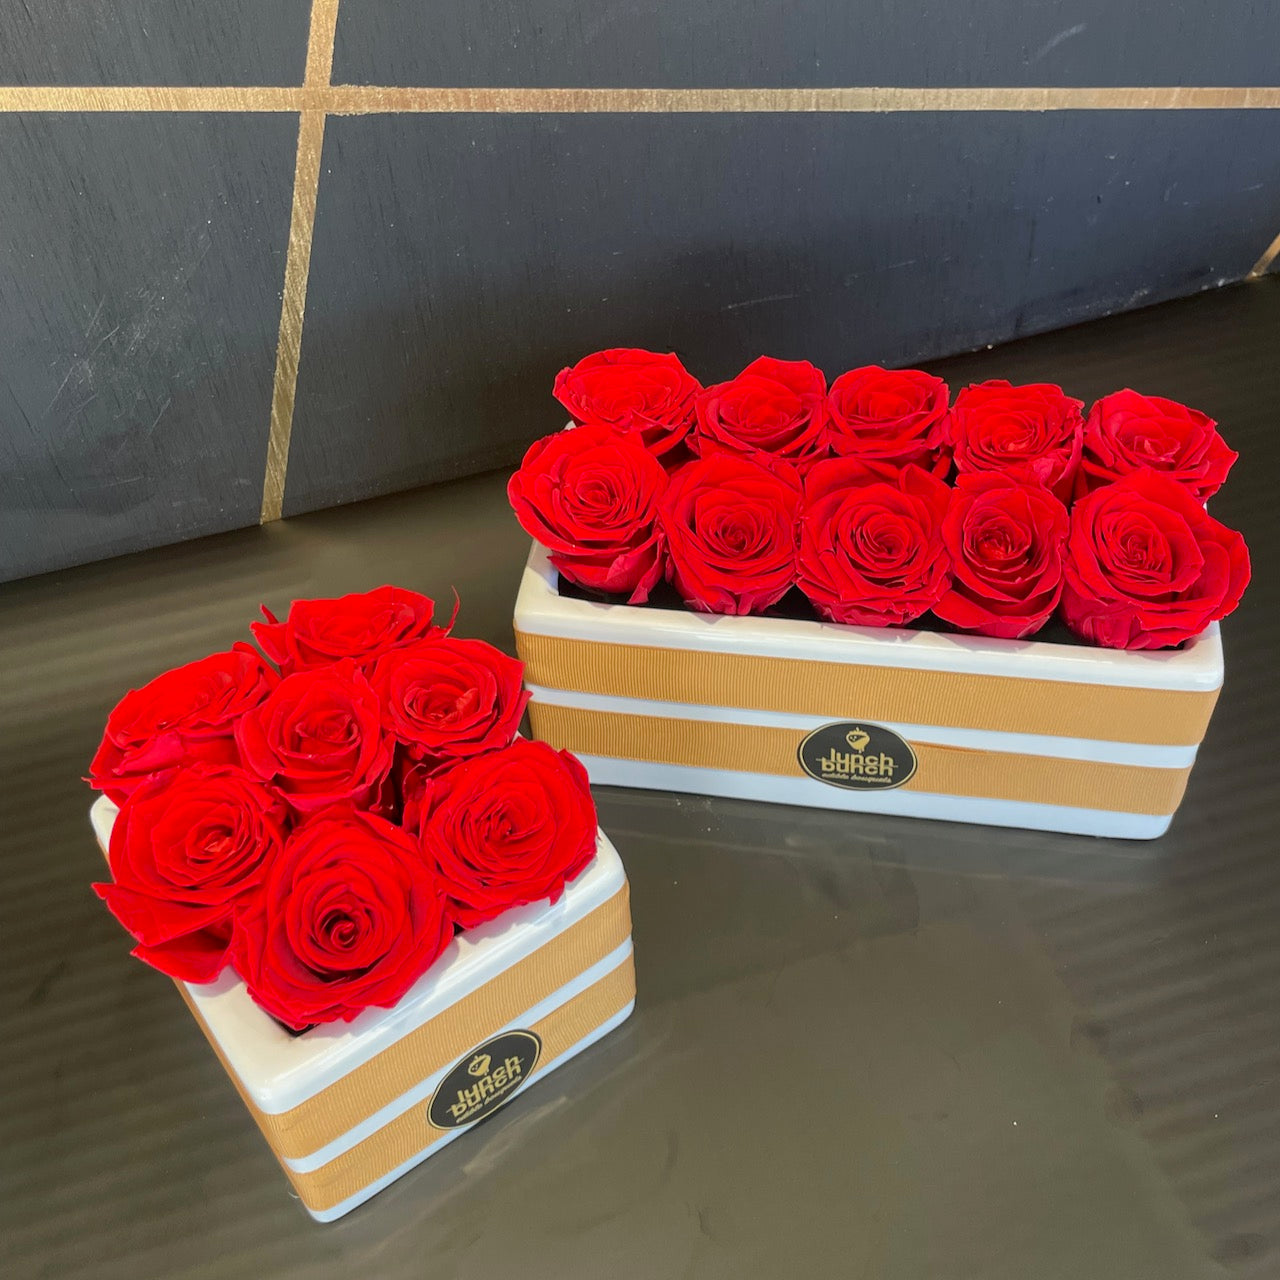 Luxury Preserved Roses can last a year. Preserved Flowers in a White Ceramic Vase, Red Roses in a box, Adelaide delivery flowers.  Eternal roses, Infinity roses, Everlasting flowers bouquet, Valentine’s Day Red Roses Bouquet, Long Lasting Flowers online, Glamorous Bouquet of Roses 